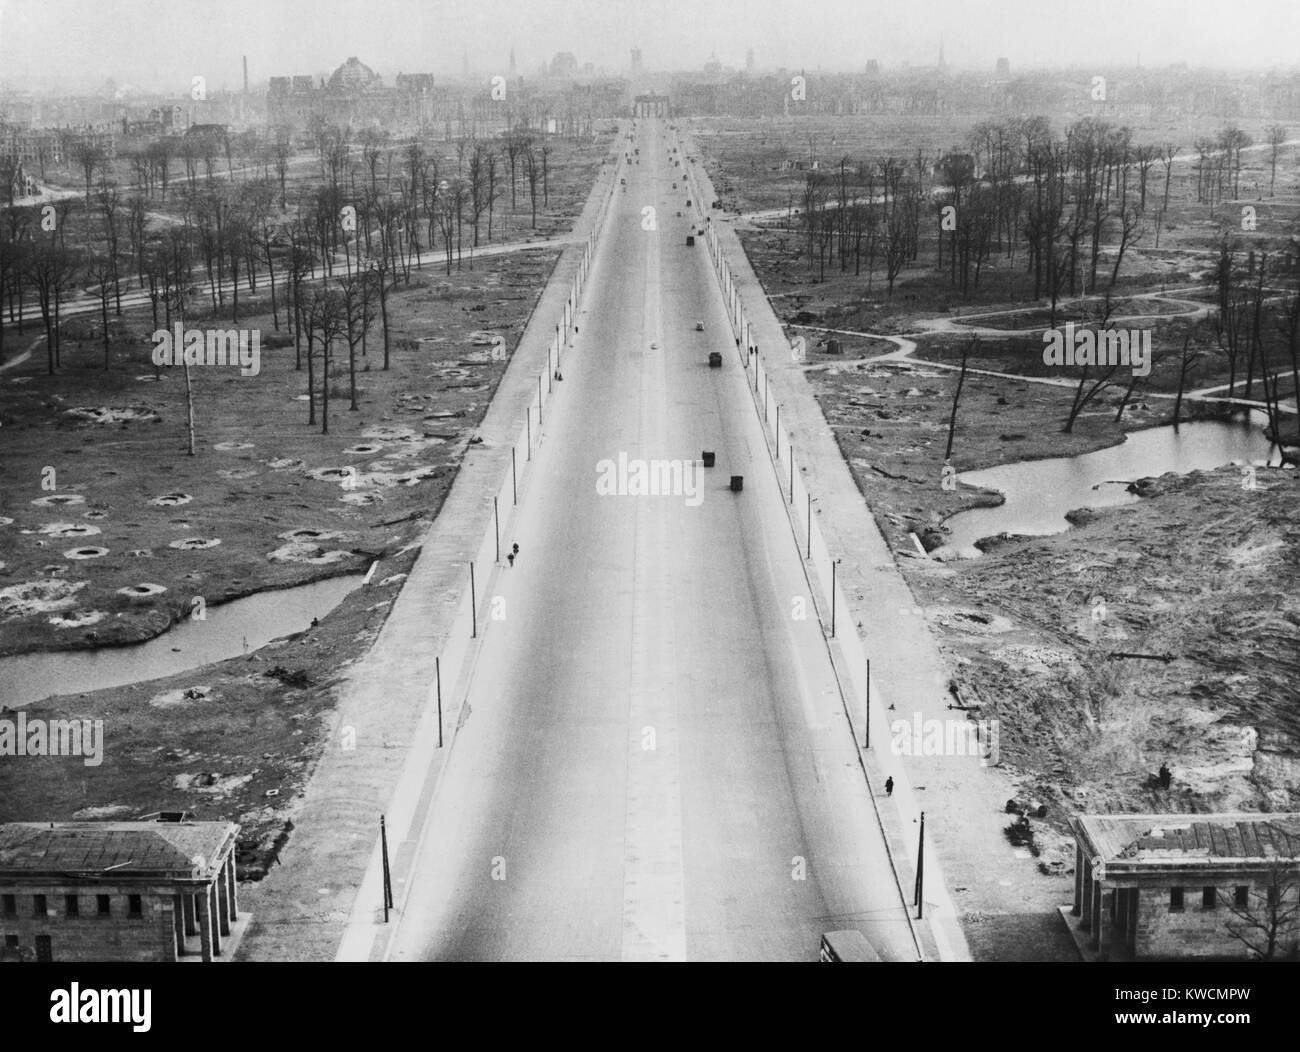 Tiergarten Park and the boulevard leading to the Brandenburg Gate after World War 2. The landscape is filled with bomb craters from the war. Berlin, Germany. Ca. 1945-46. - (BSLOC_2014_15_243) Stock Photo